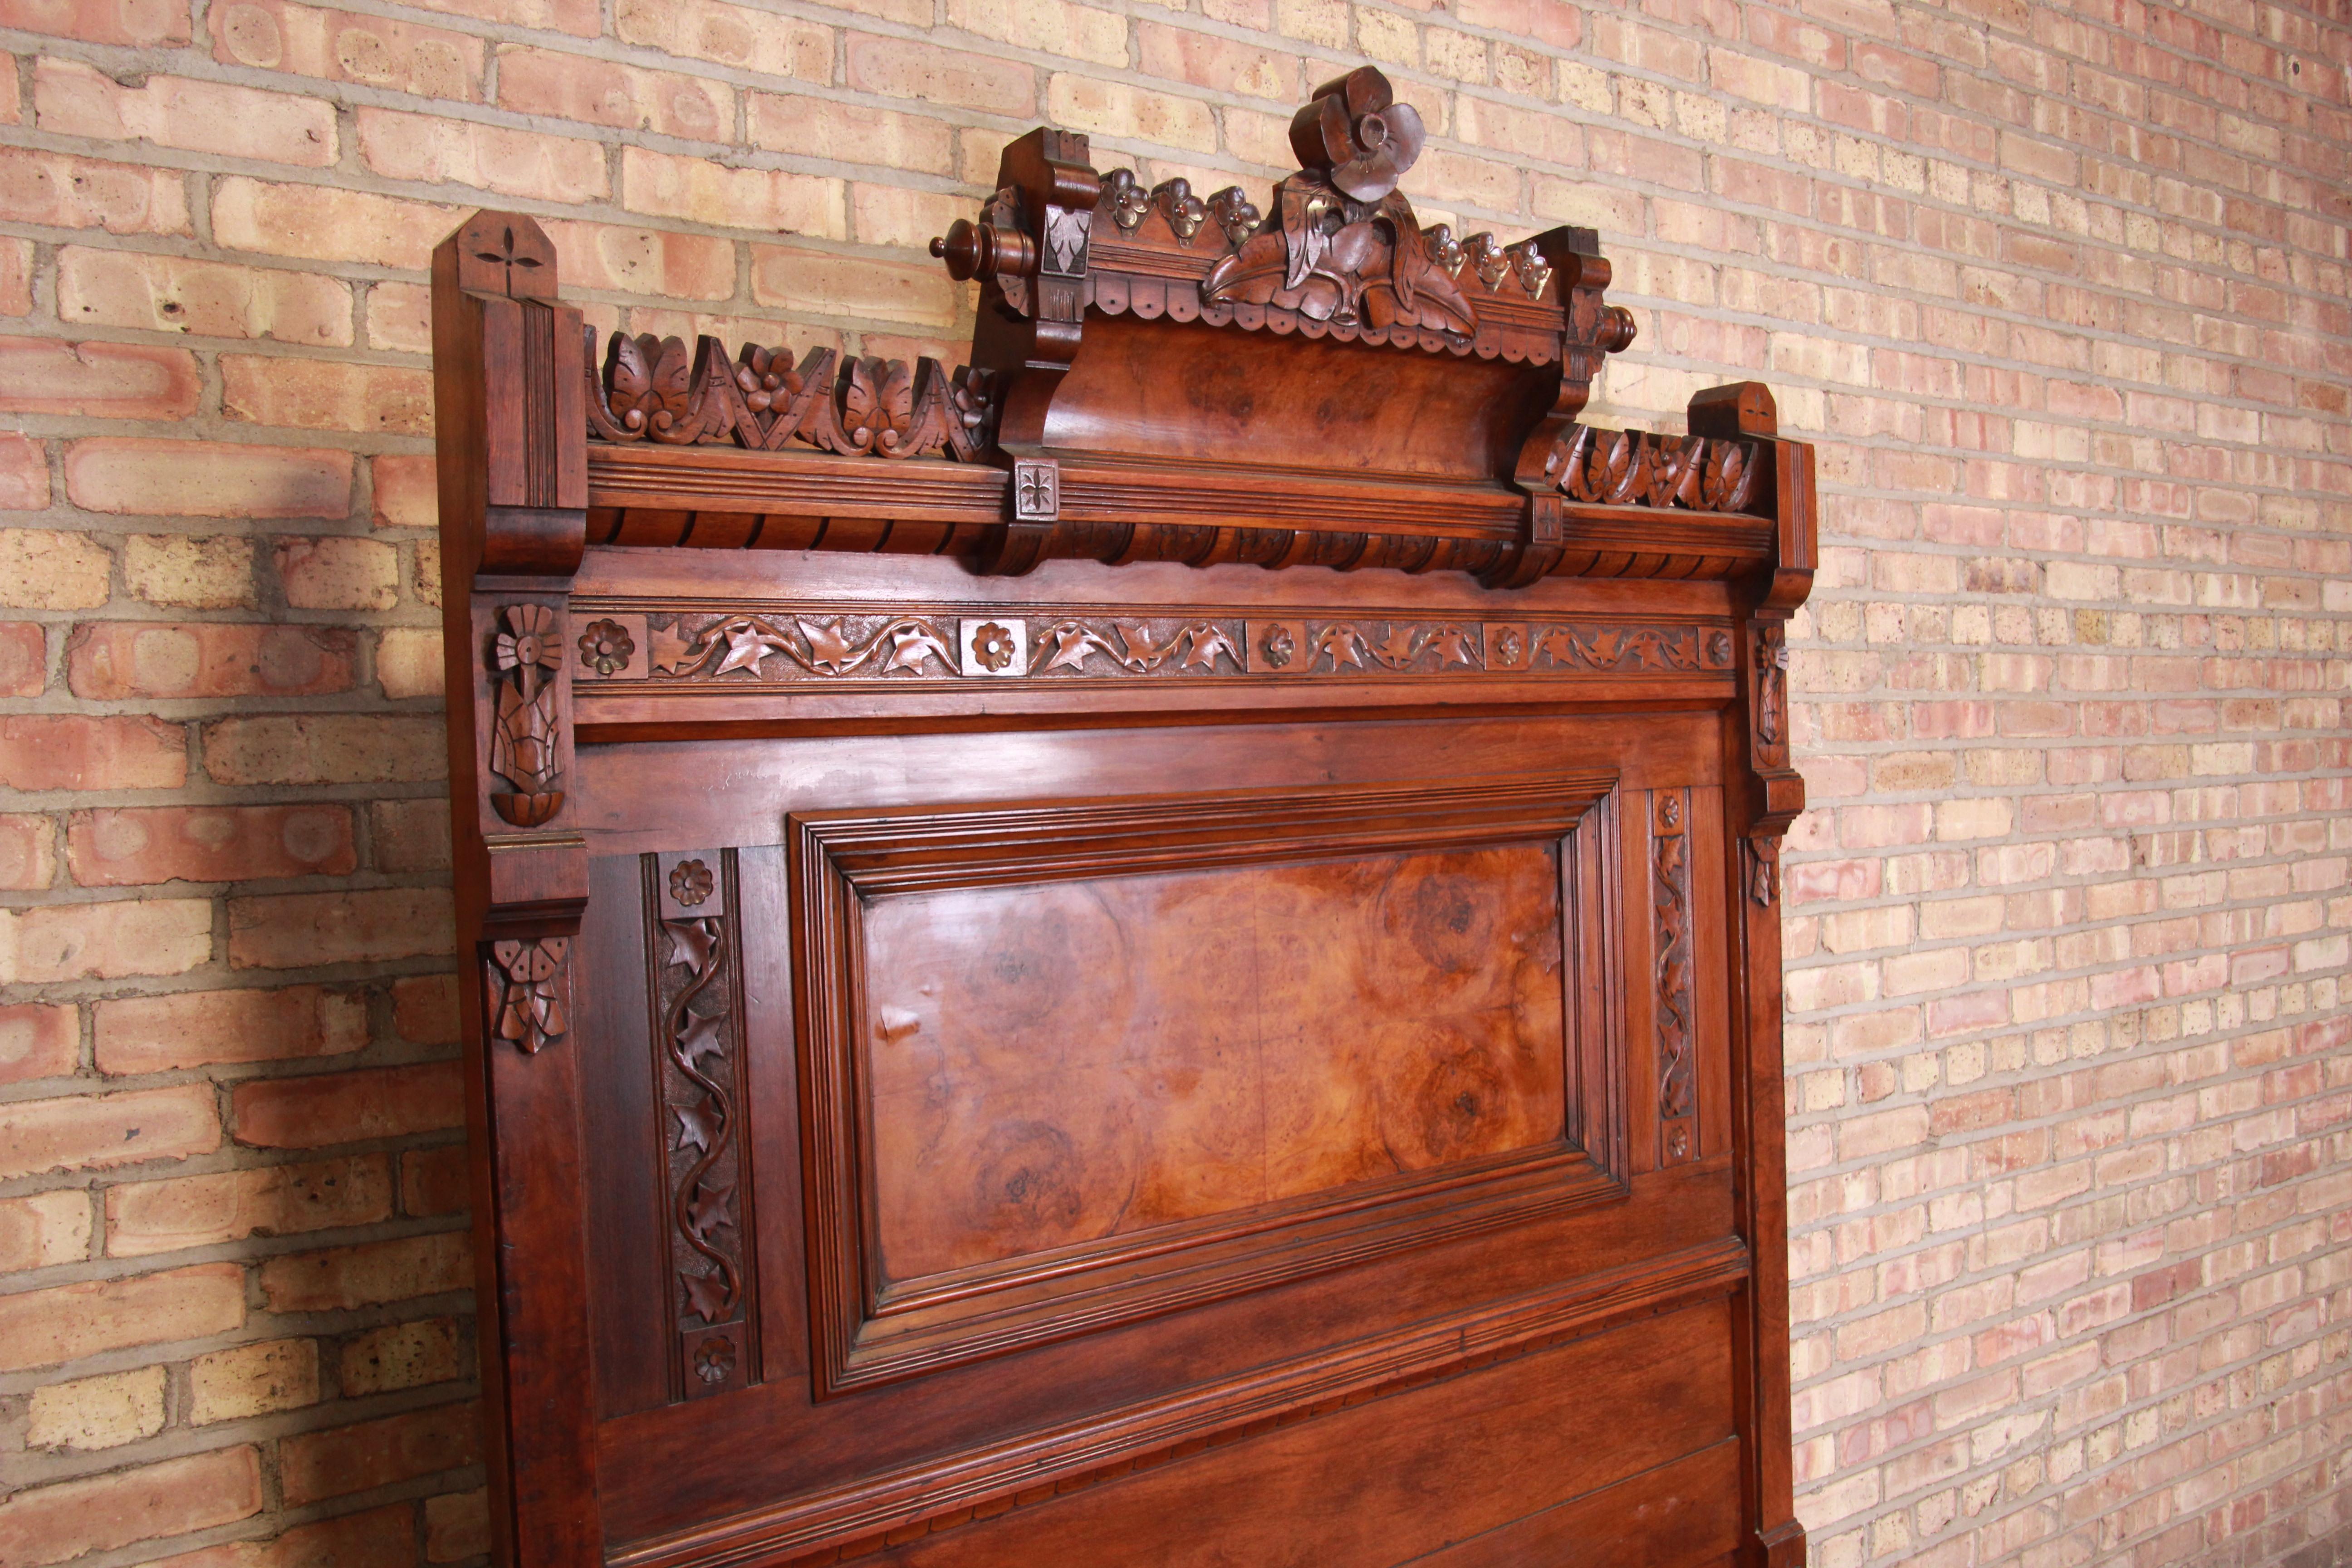 Late 19th Century Monumental Eastlake Victorian Carved Walnut and Burl Wood Bed, circa 1870